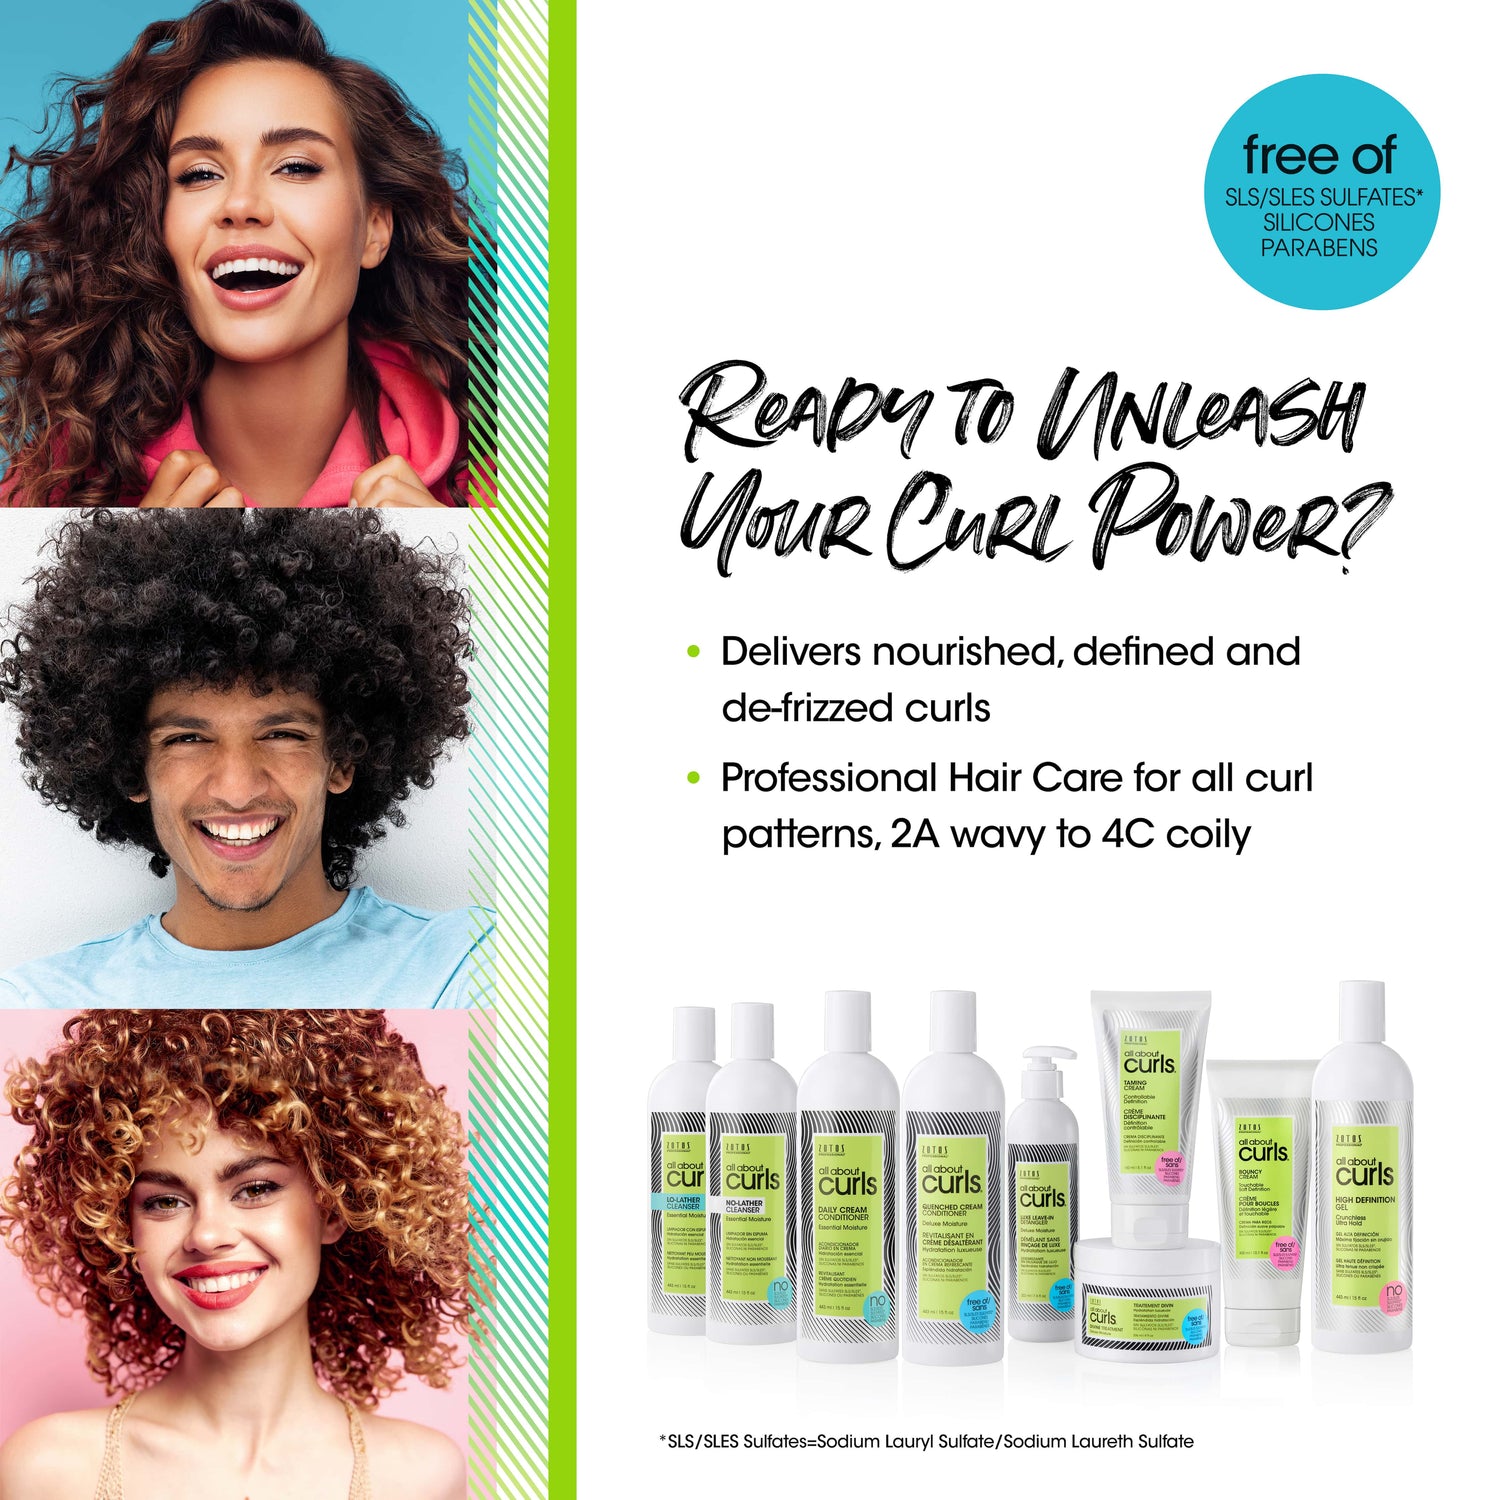 All About Curls® Quenched Cream Conditioner